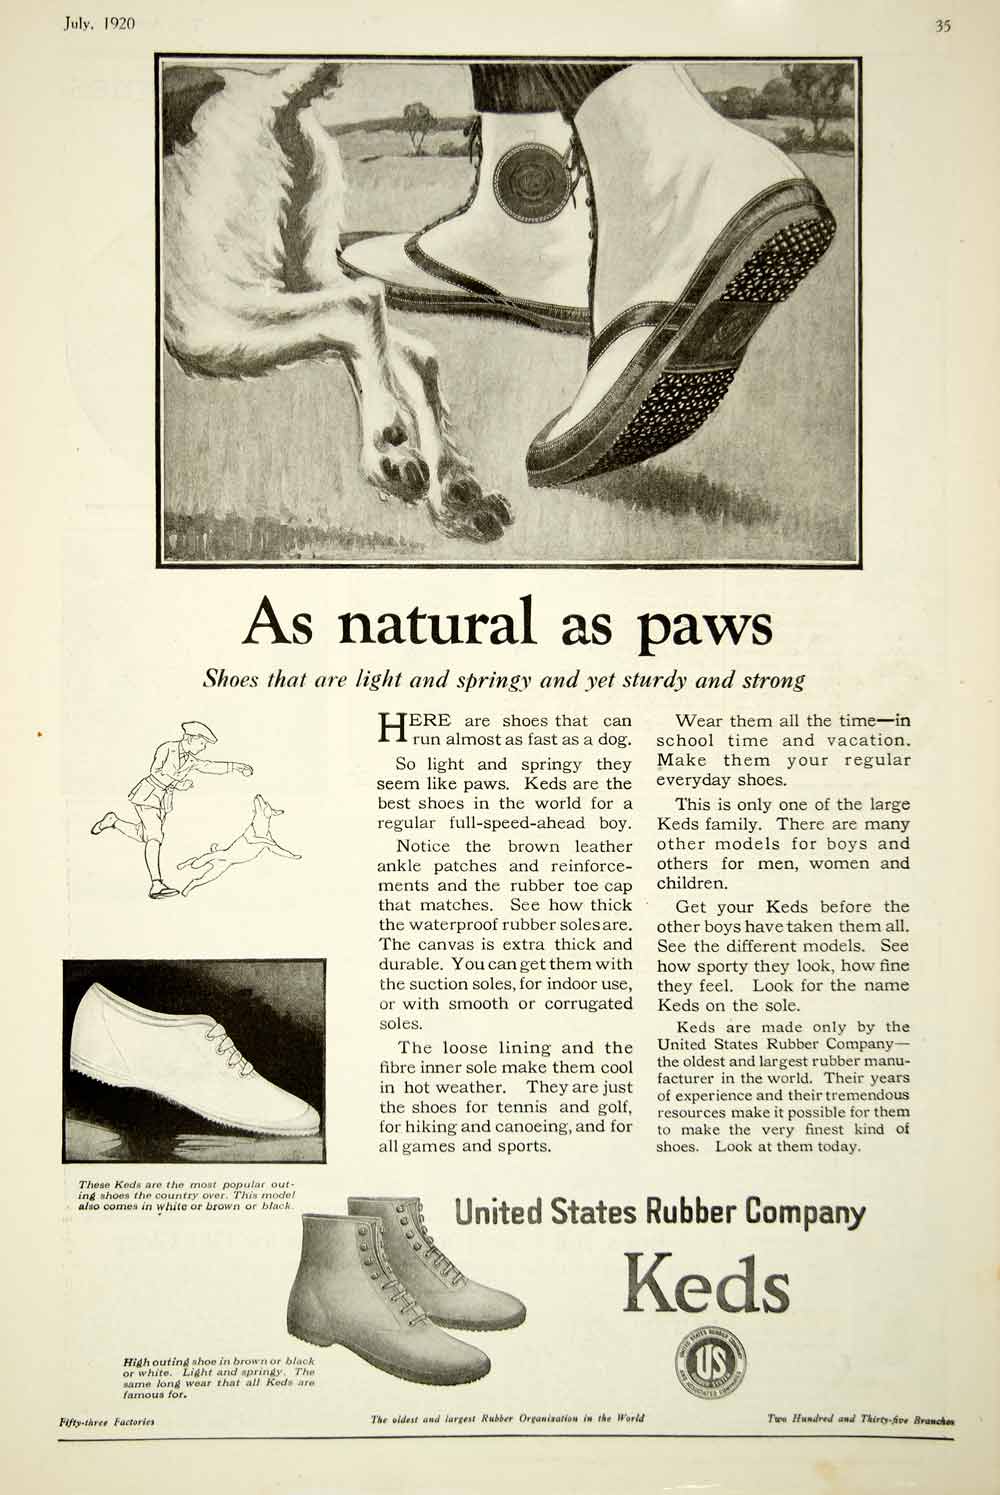 1920 Ad Keds Rubber Shoe Footwear Natural Paws Dog Pair Lawn High Outing YAB1